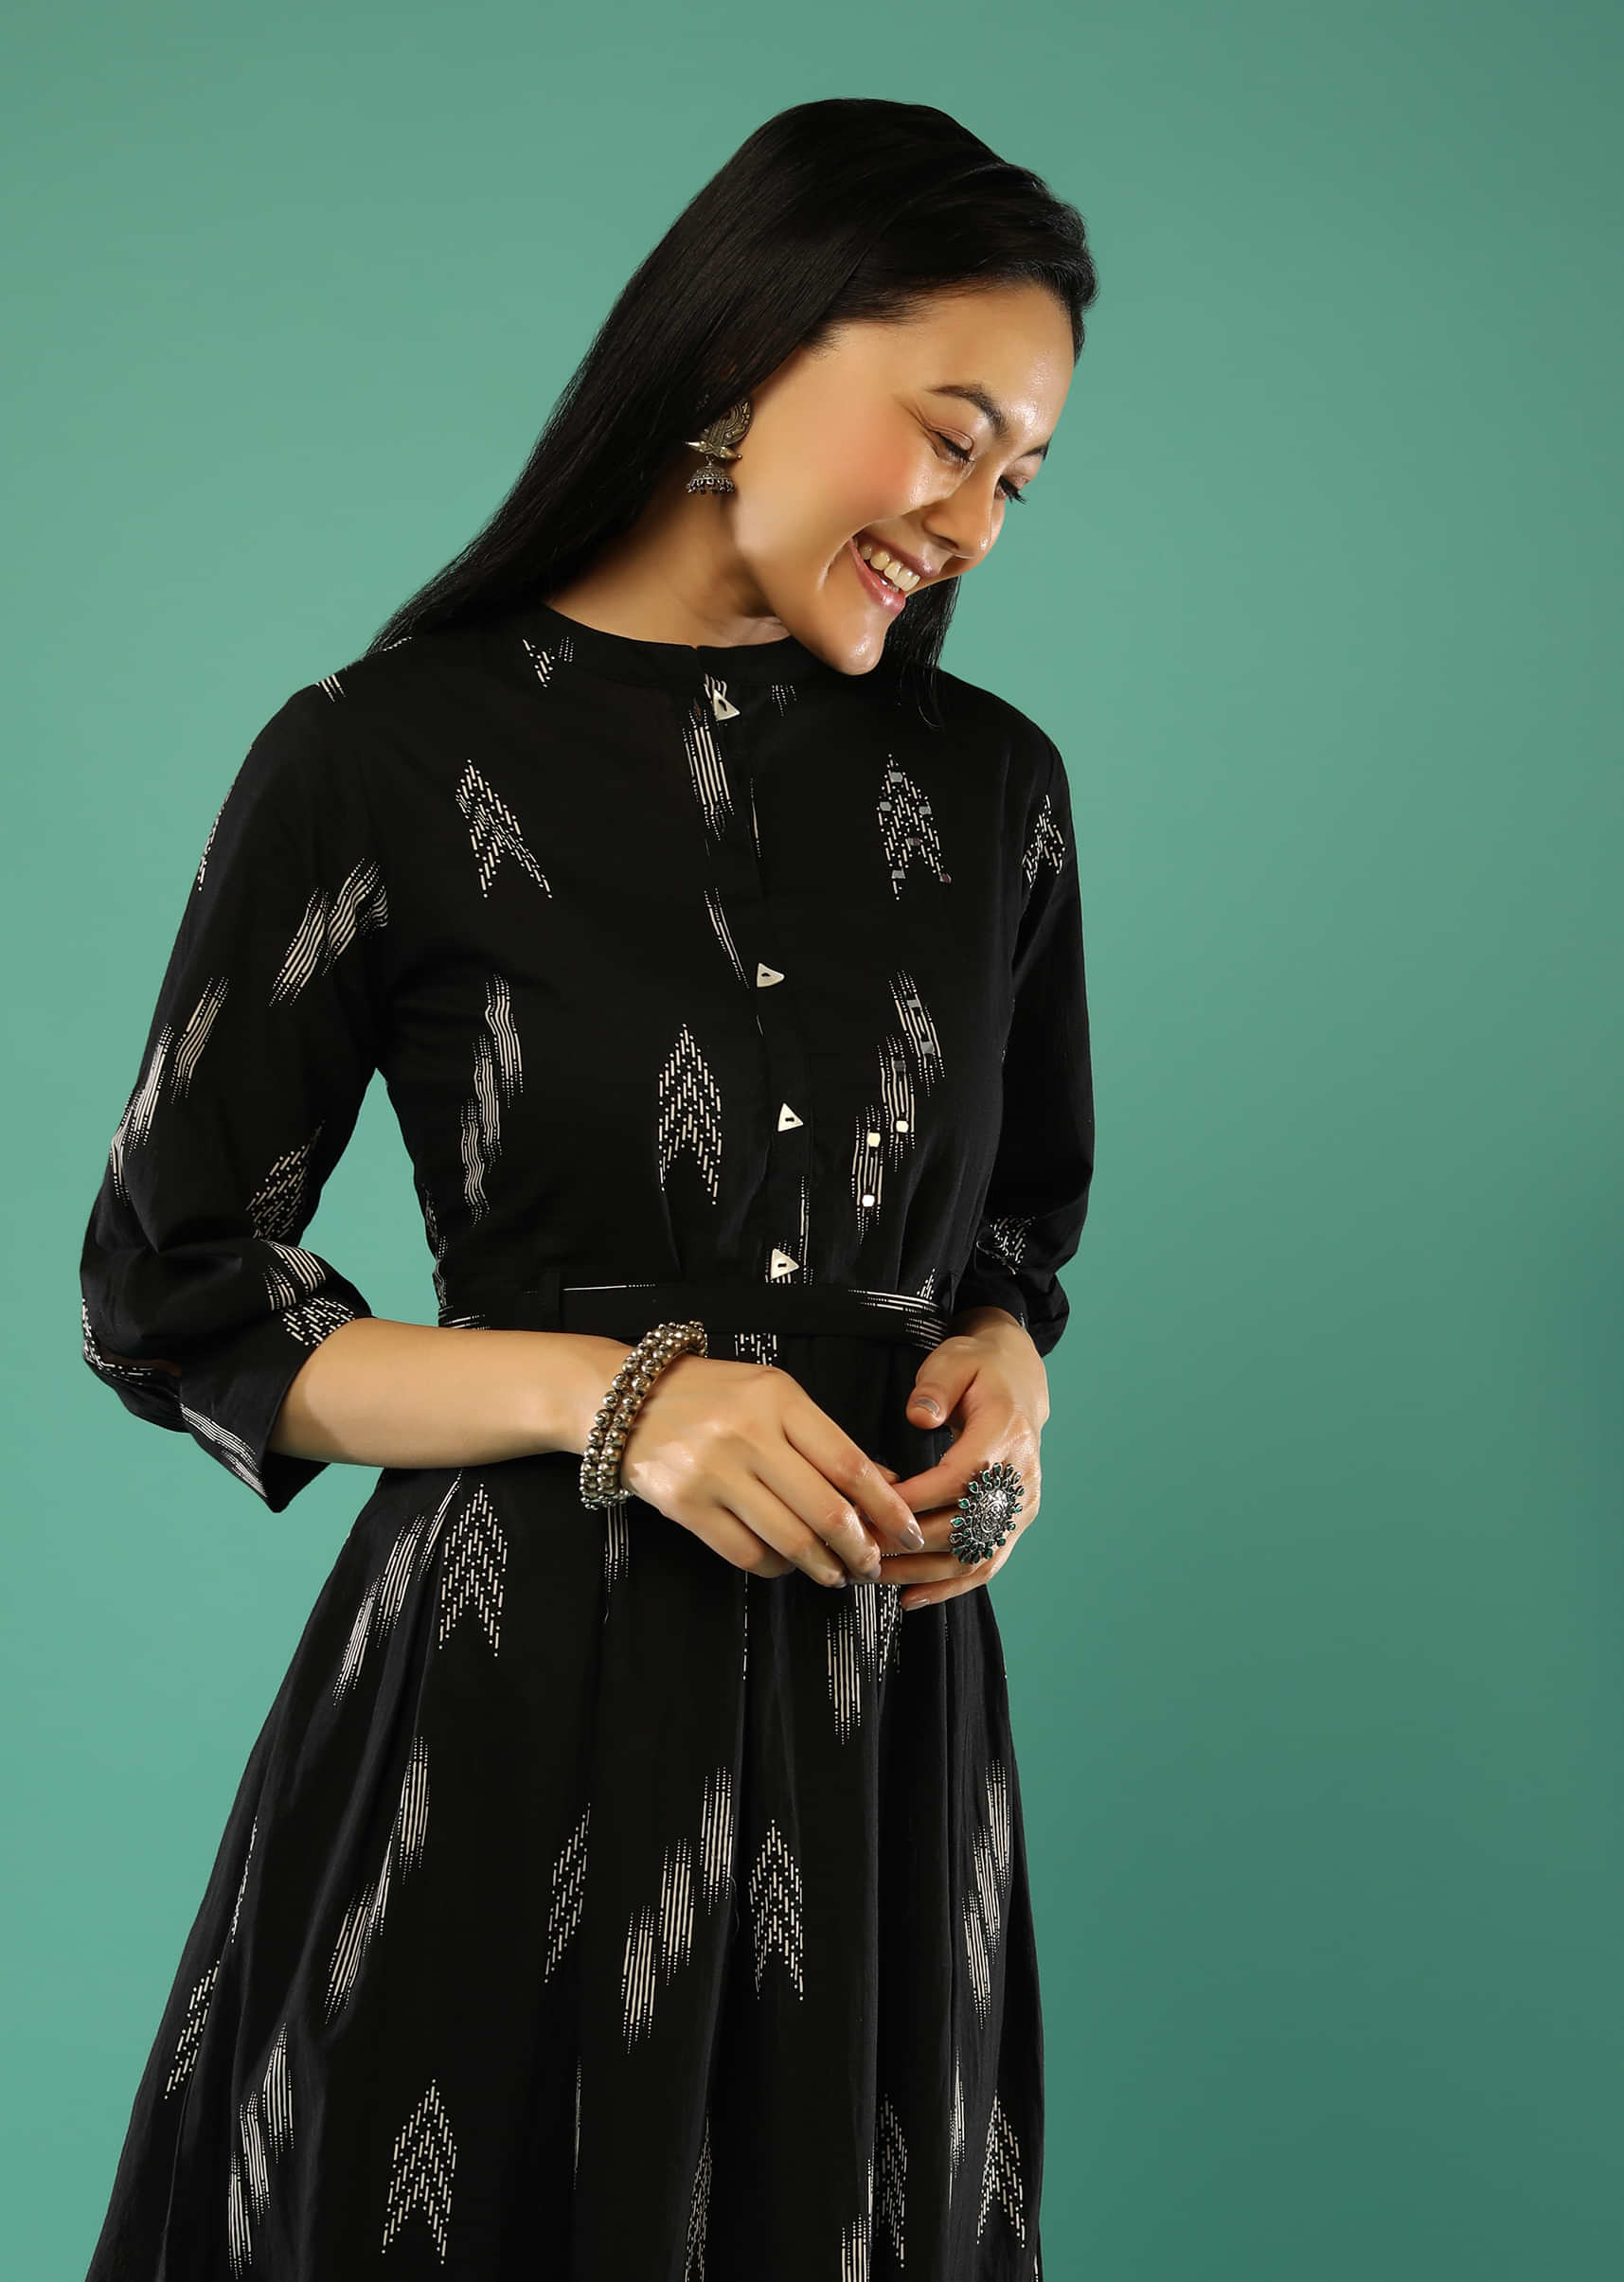 Black Tiered Dress With Ikkat Print And Mock Placket Online - Re By Kalki